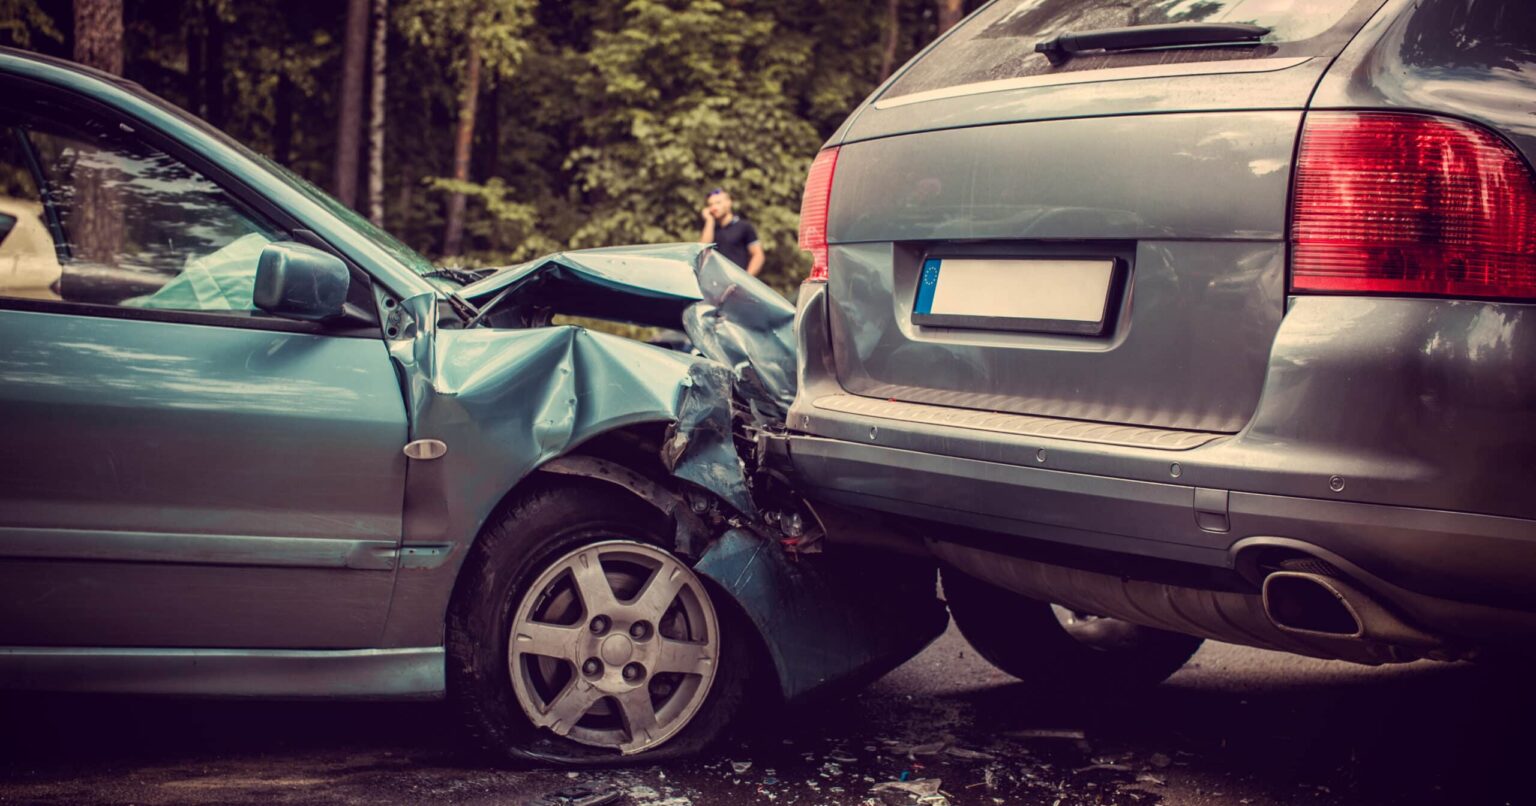 Repair or Replace Your Vehicle After a Collision